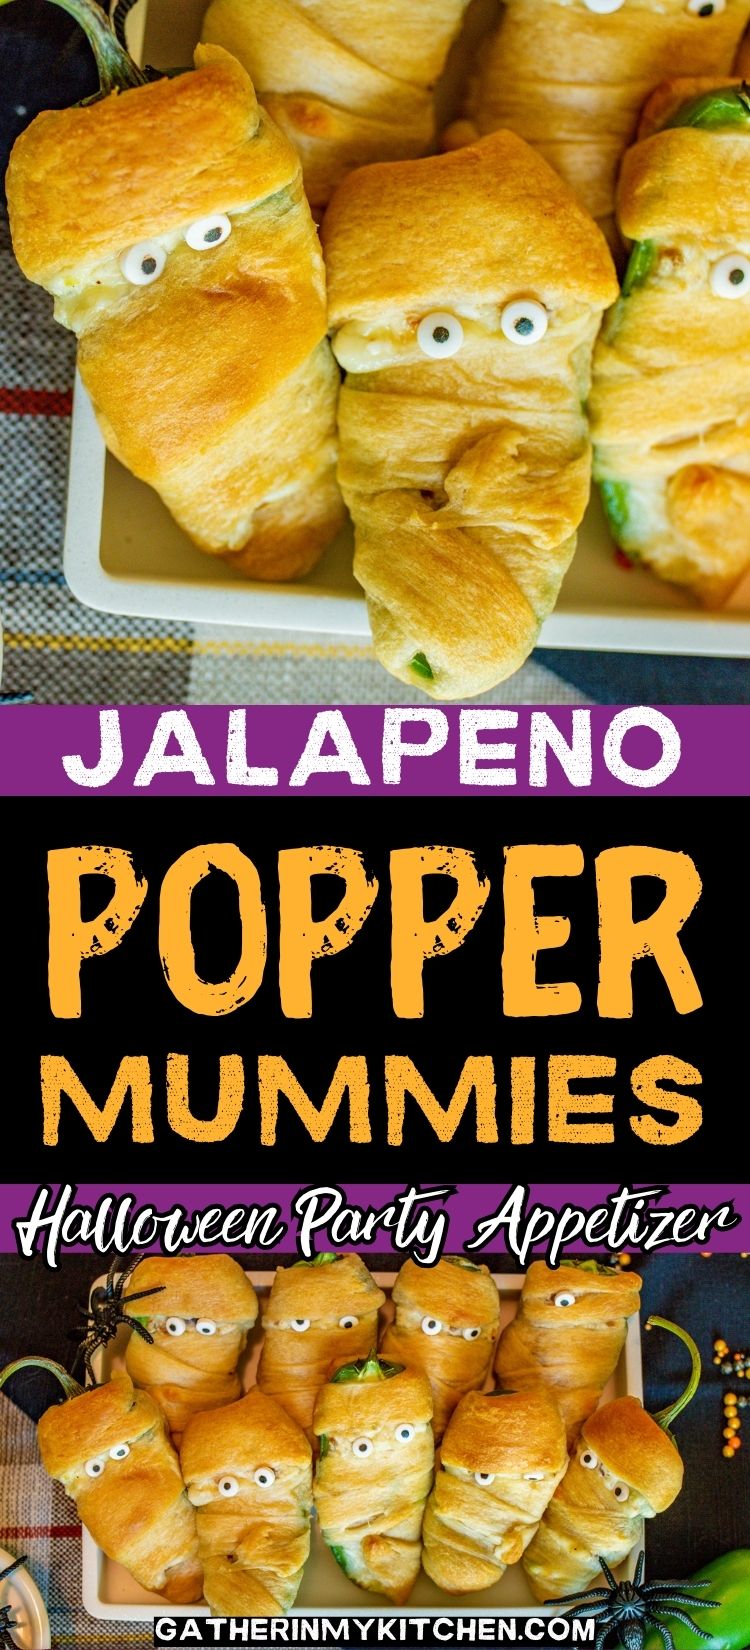 Pin image: closeup of jalapeno popper mummies, middle says "Jalapeno Popper Mummies Halloween Party Appetizer" and bottom shows top down view of jalapeno popper mummies